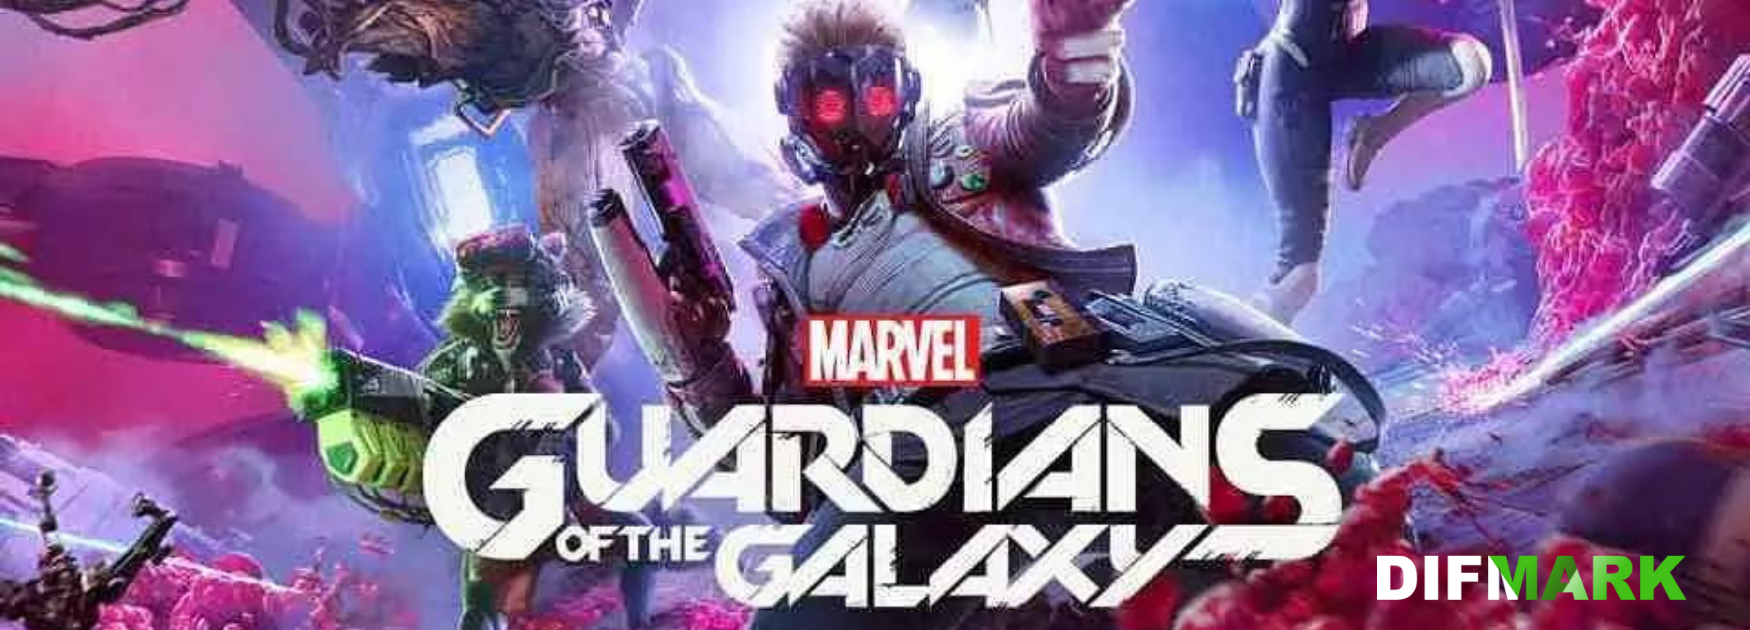 Guardians of the Galaxy Disappointed Square Enix